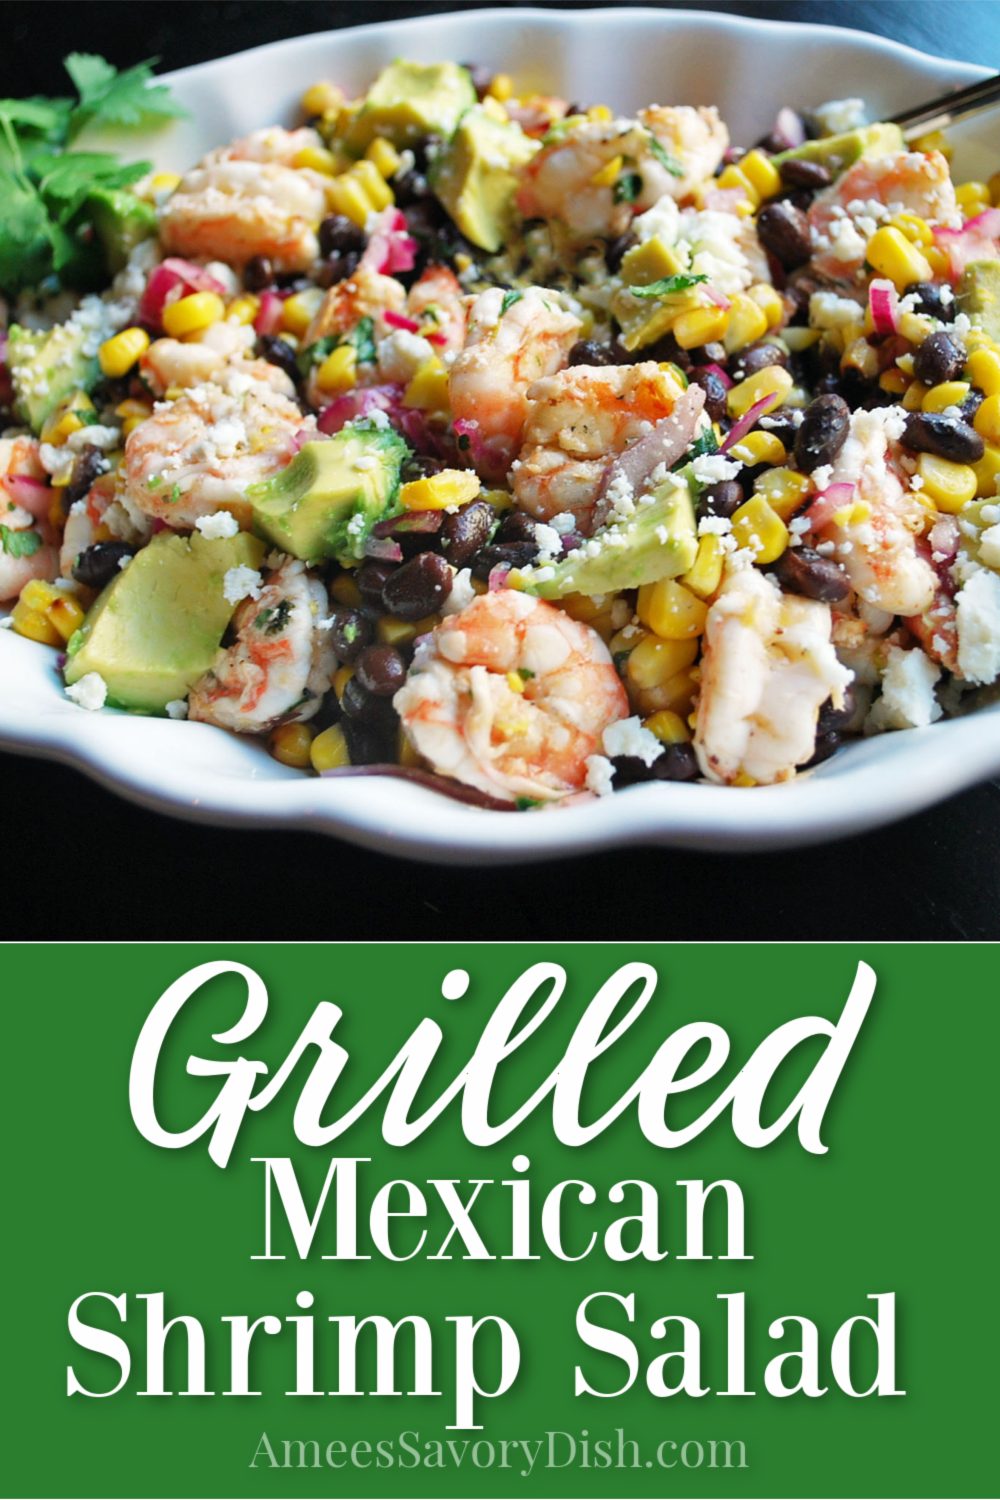 A Mexican-inspired salad recipe made with grilled shrimp, corn, black beans, avocado, and crumbled Cojita cheese. #shrimpsalad #grilledshrimp #mexicanrecipe #mexicansalad #shrimprecipe #glutenfree via @Ameessavorydish